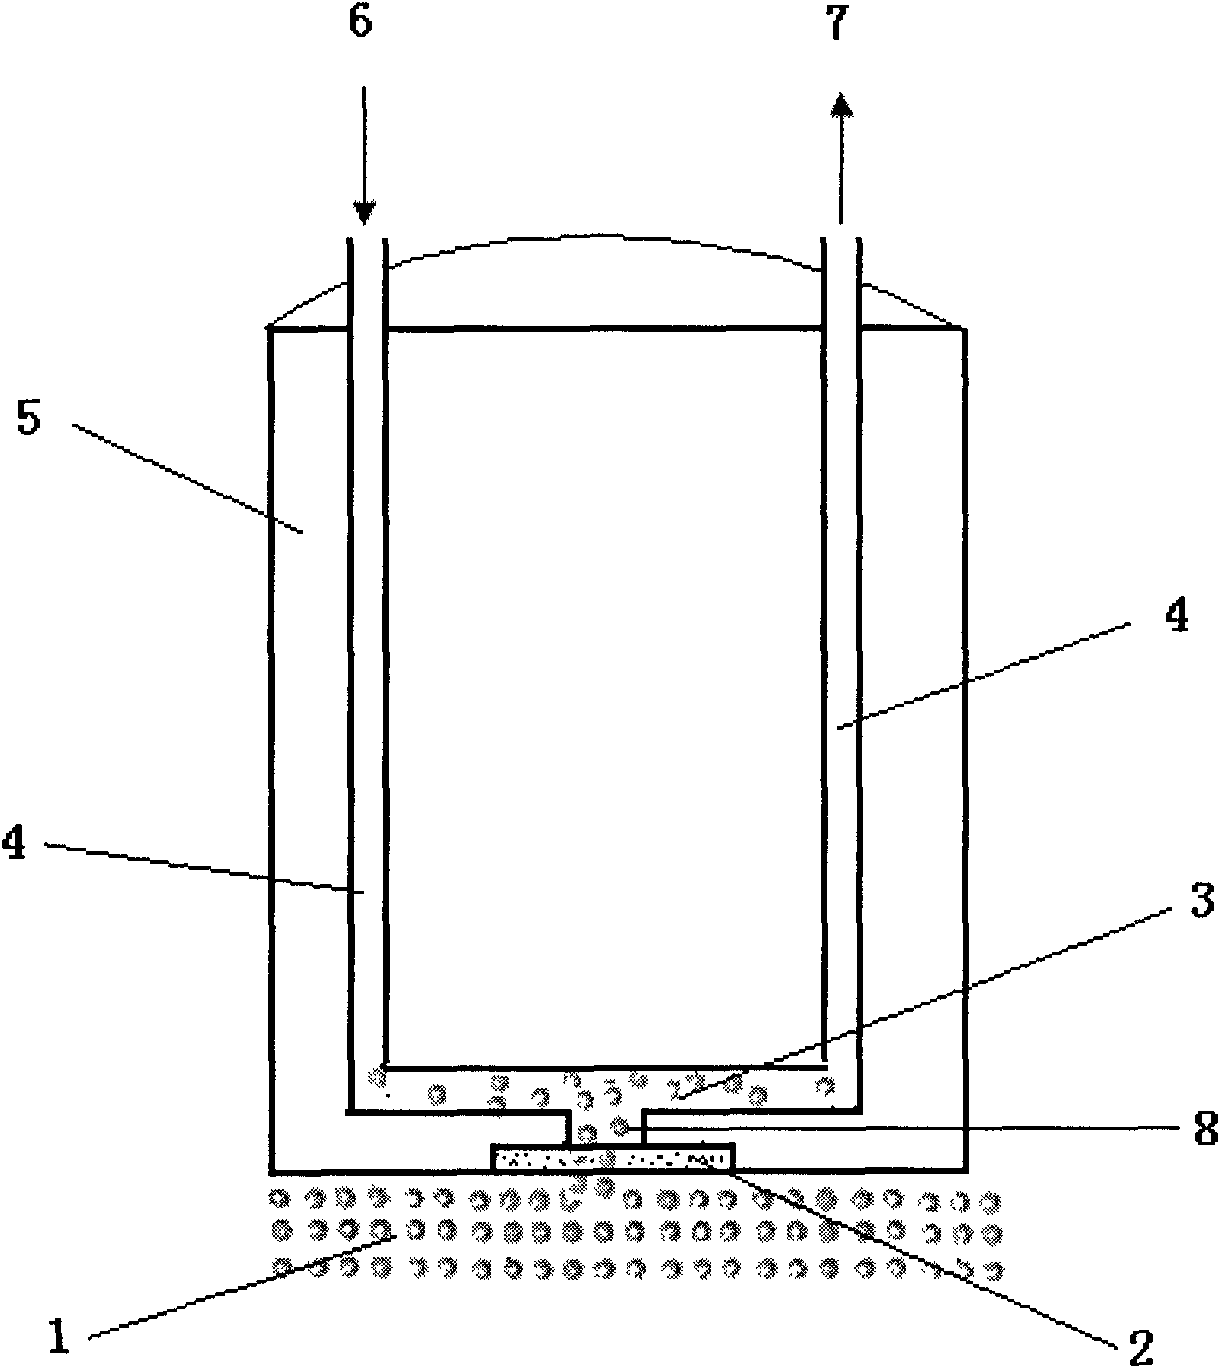 A concentration gradient diffusion sampling device for an online detection system of a bioreactor